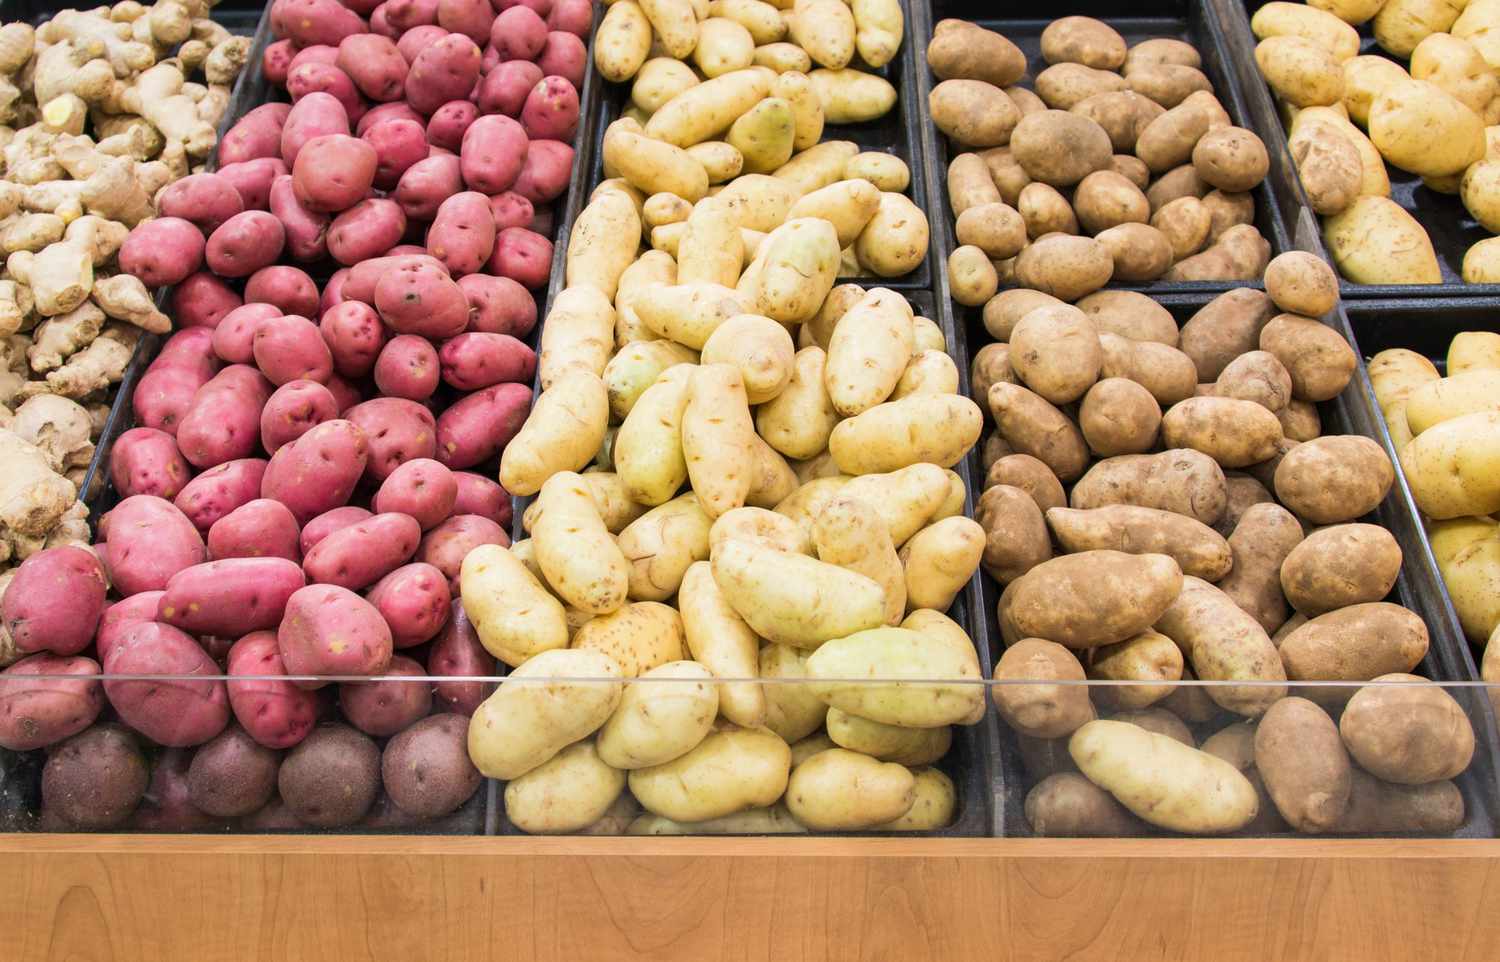 Different colors and varieties of potatoes in a grocery store